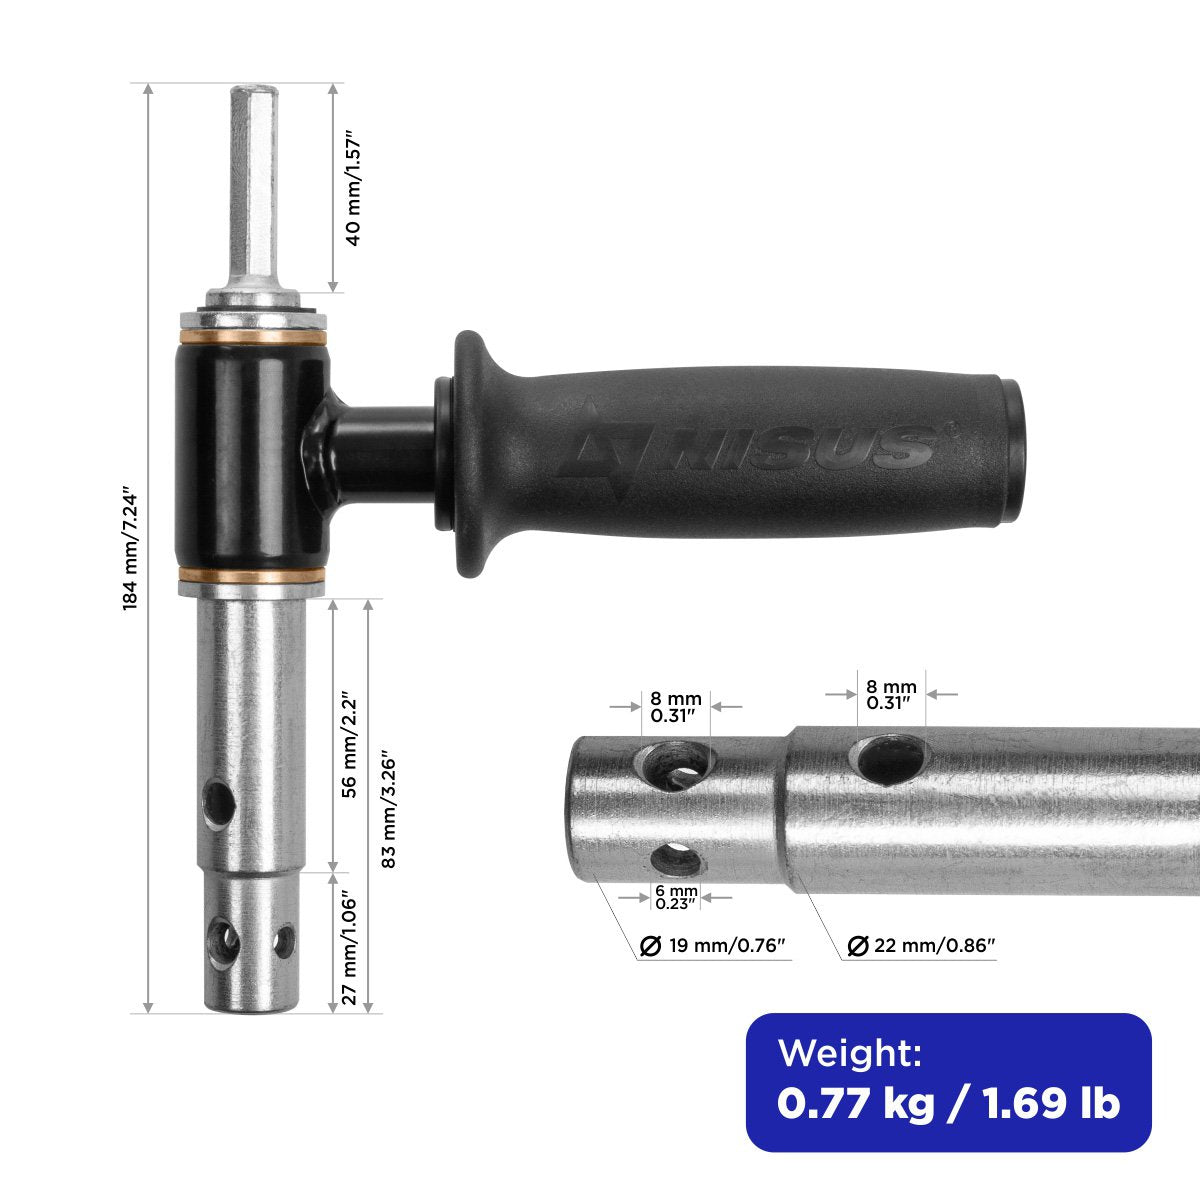 Professional Ice Fishing Auger Drill Bit with Cordless Drill Adapter | Drill Attachment Adapter with Safety Handle | Essential Ice Fishing Gear for Ice Anglers